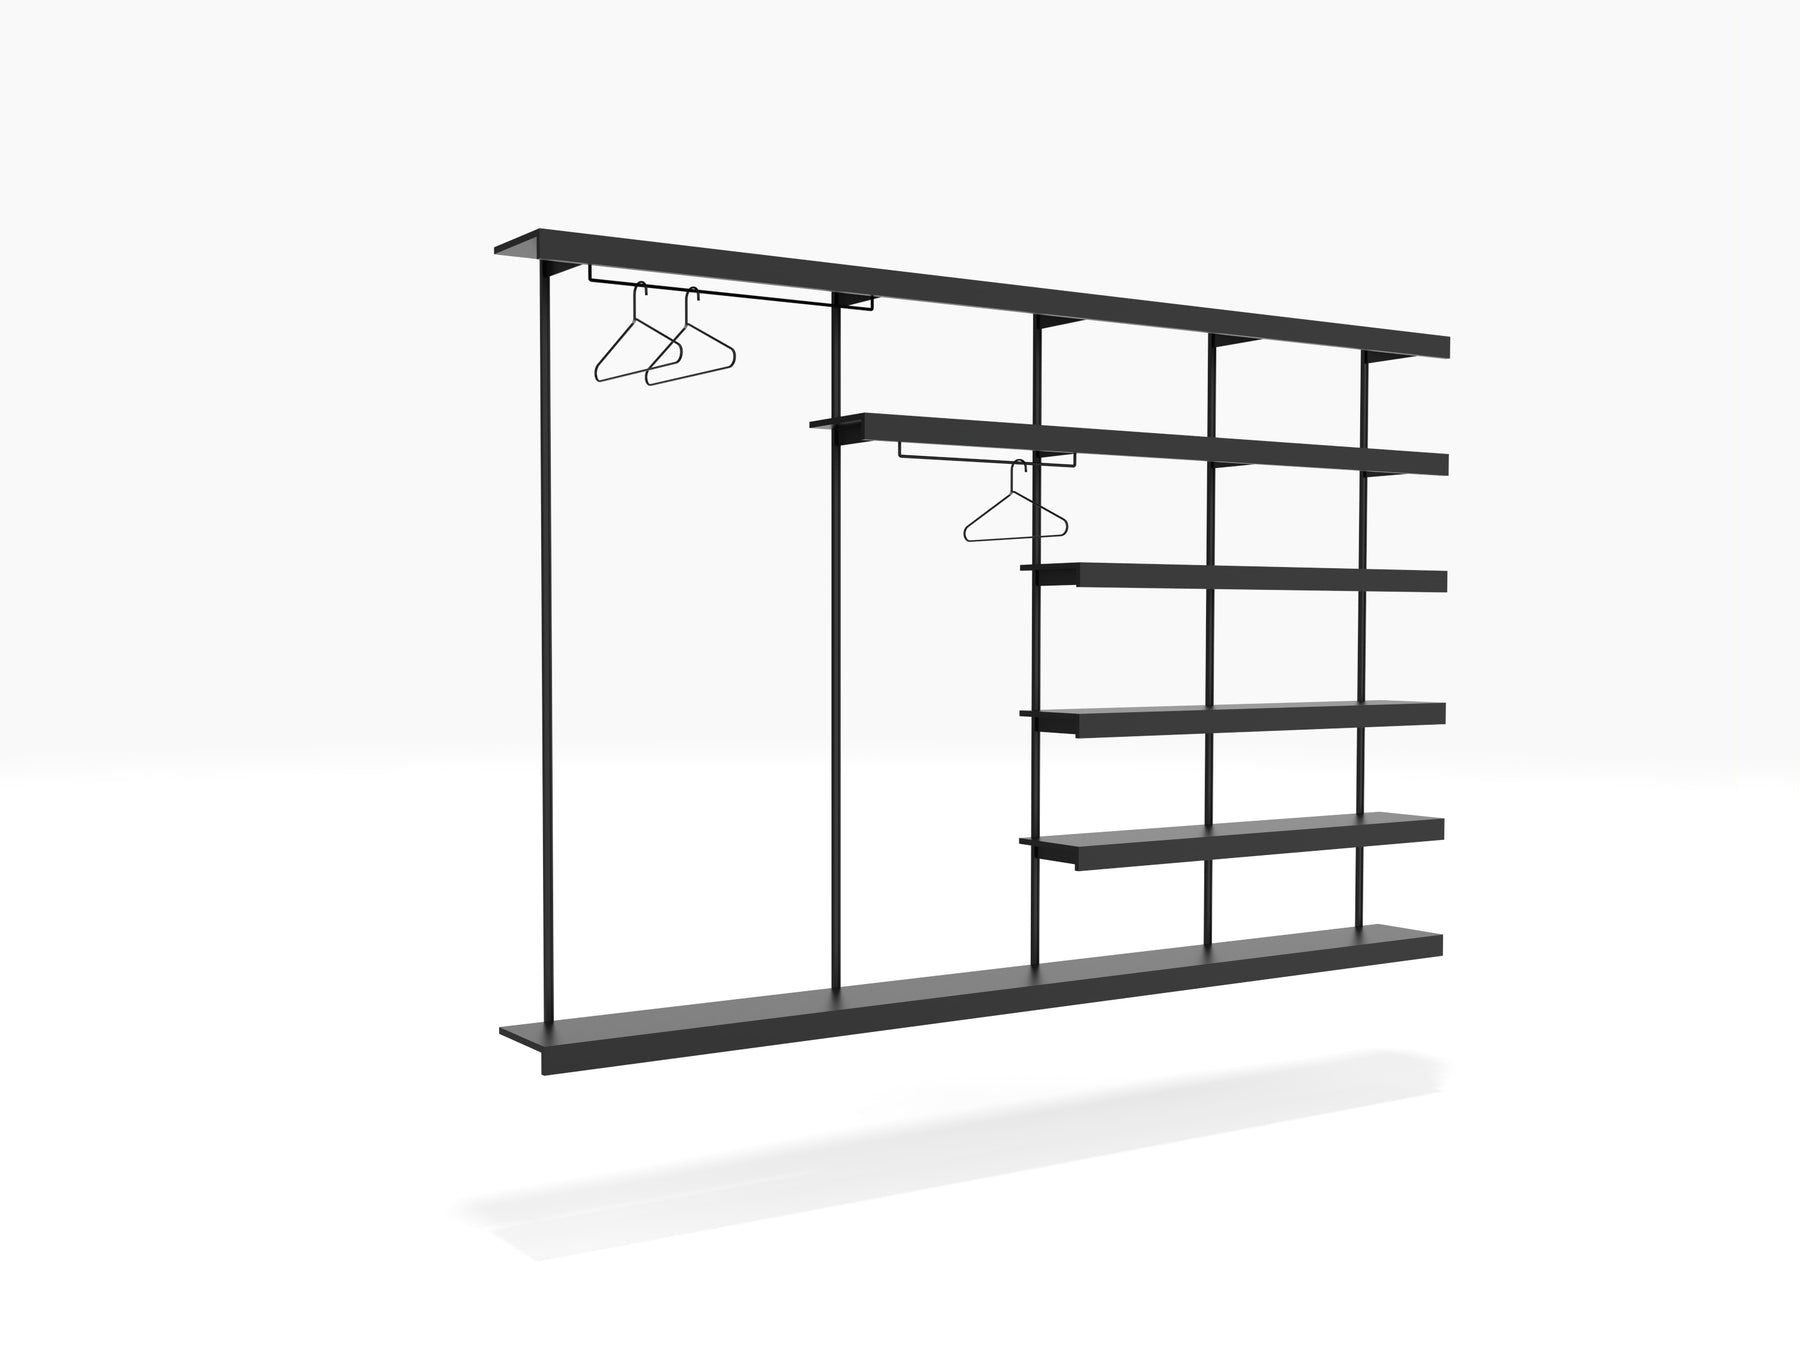 Bedroom shelving system wall mounted with clothes hangers